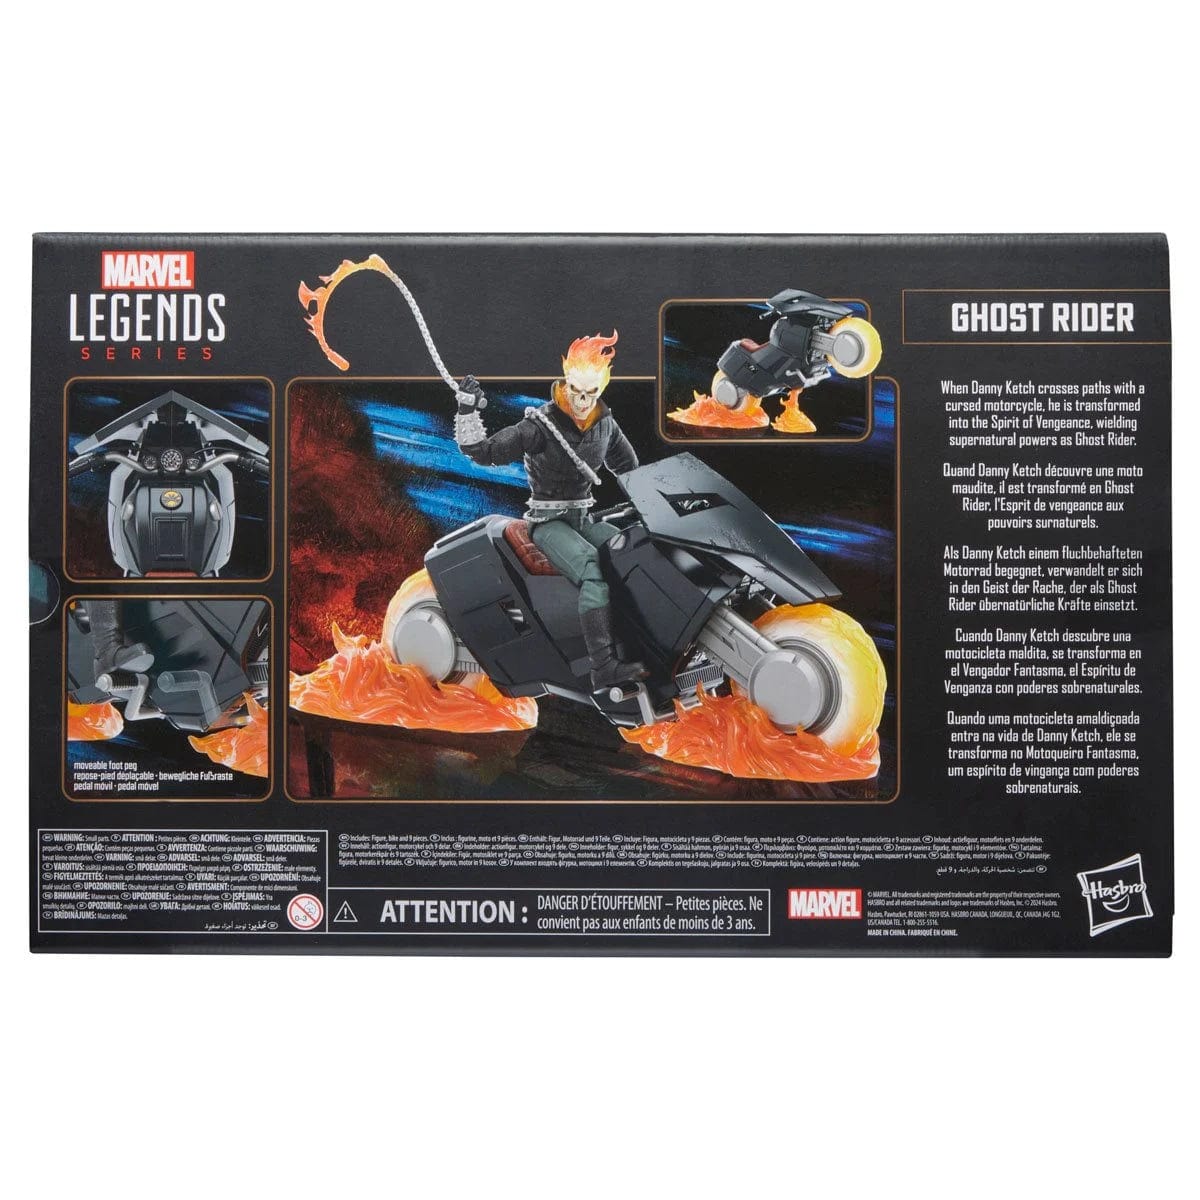 Marvel-Legends-Series-Ghost-Rider-_Danny-Ketch_-with-Motorcycle-Action-Figure-Back-Box-Art